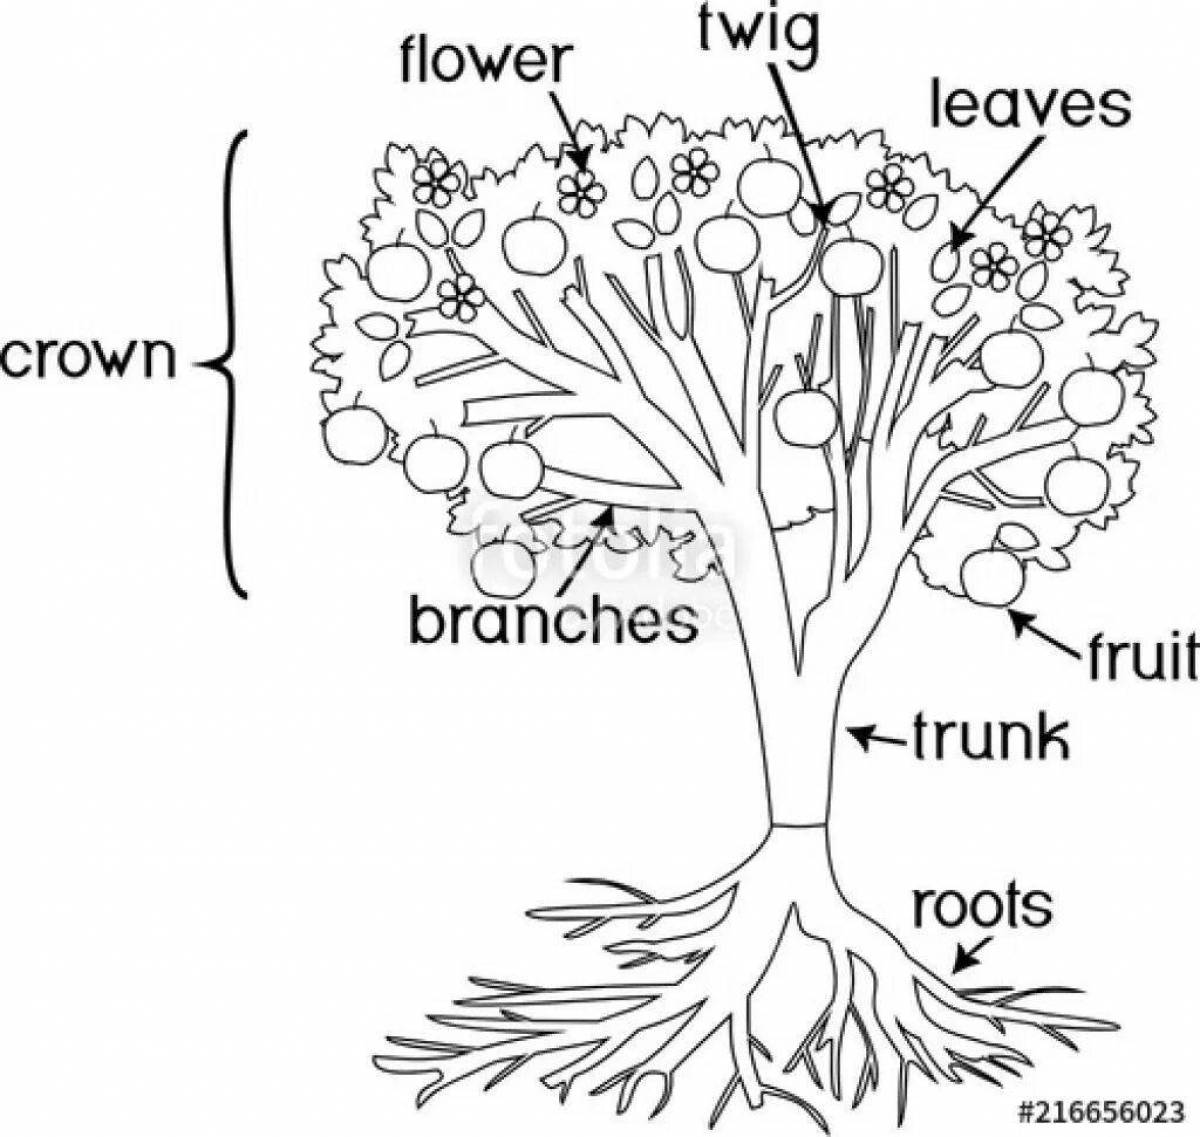 Fun plant parts for 1st grade kids